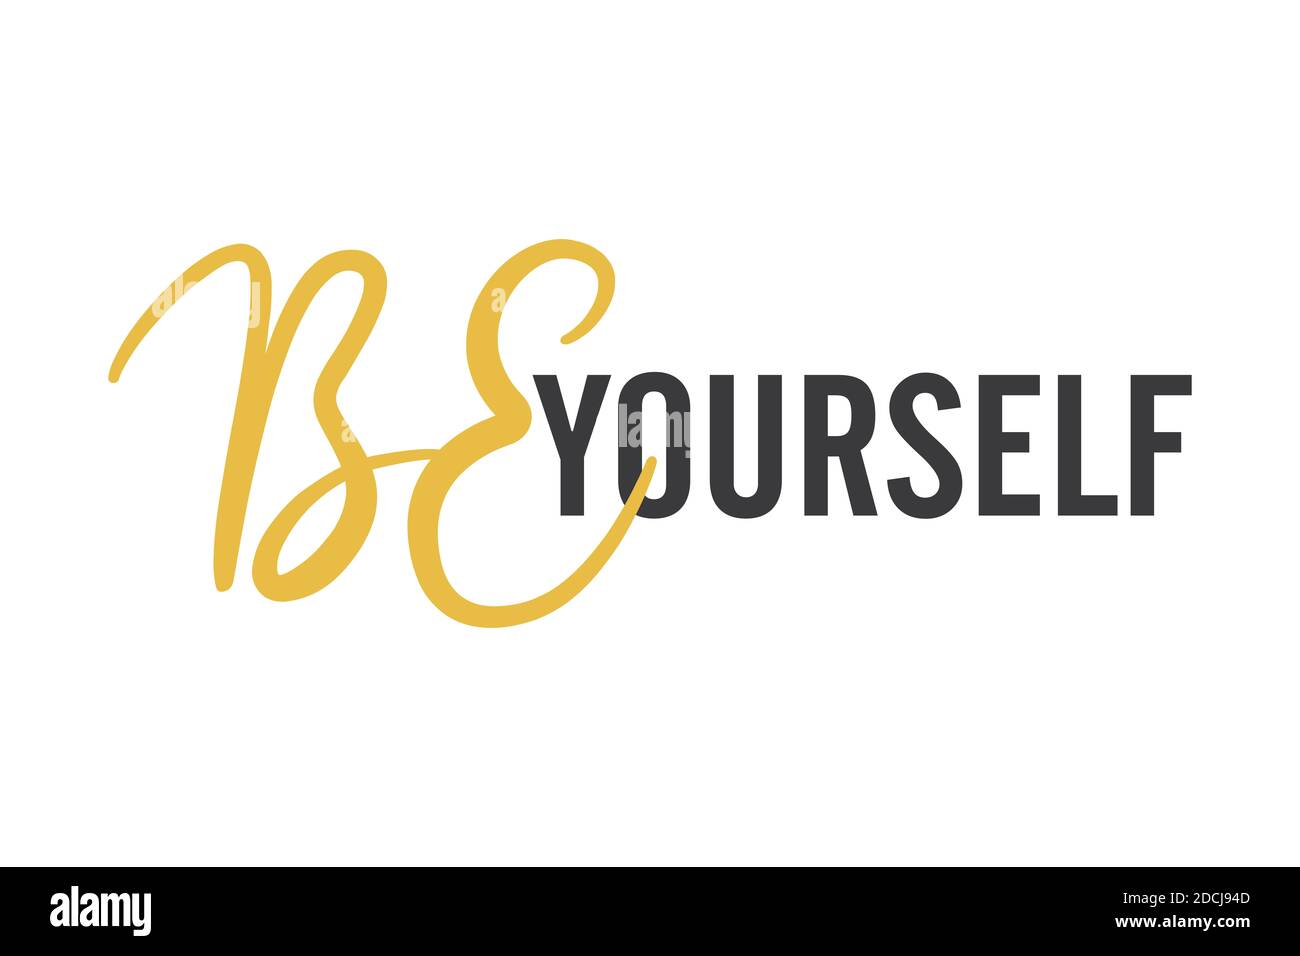 Modern, creative graphic design of a saying 'Be Yourself'. Urban, bold, vibrant typography in yellow, red, blue and black colors. Stock Photo